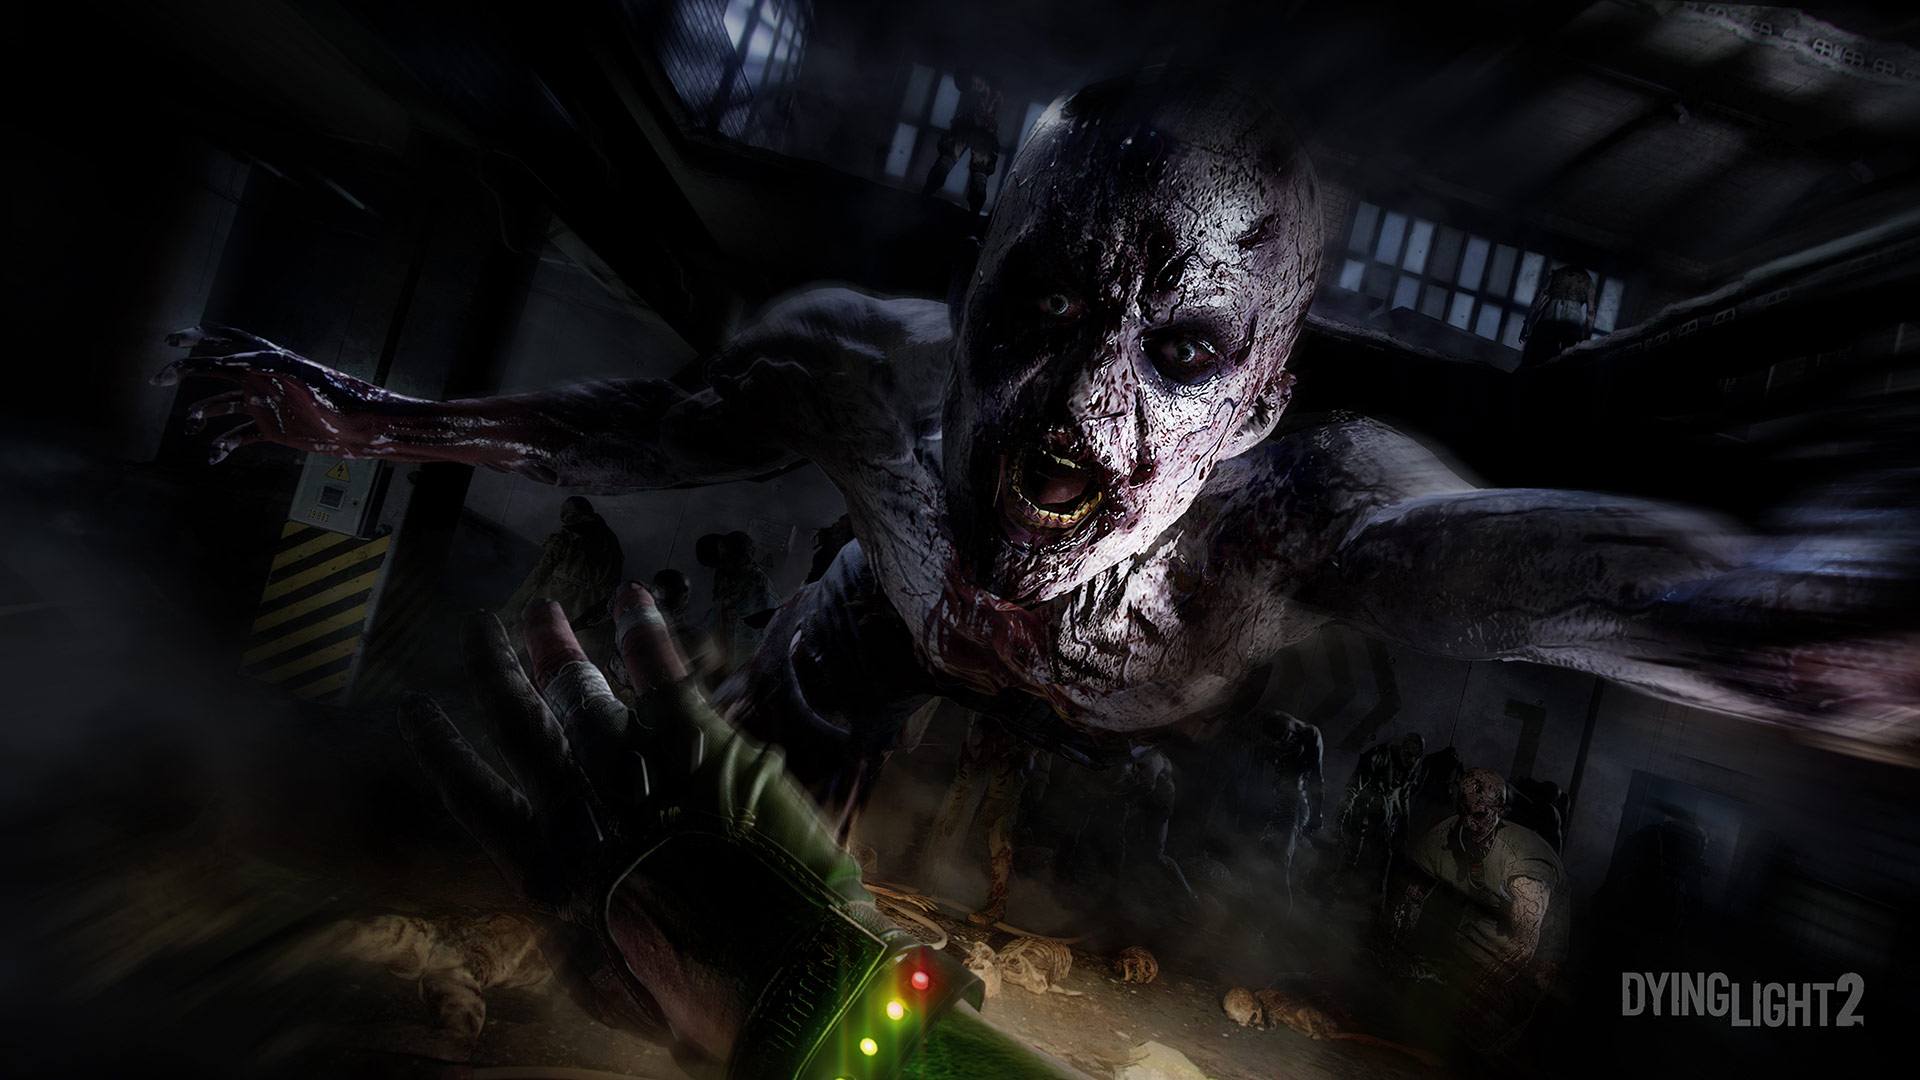 Dying Light 2 release date delayed